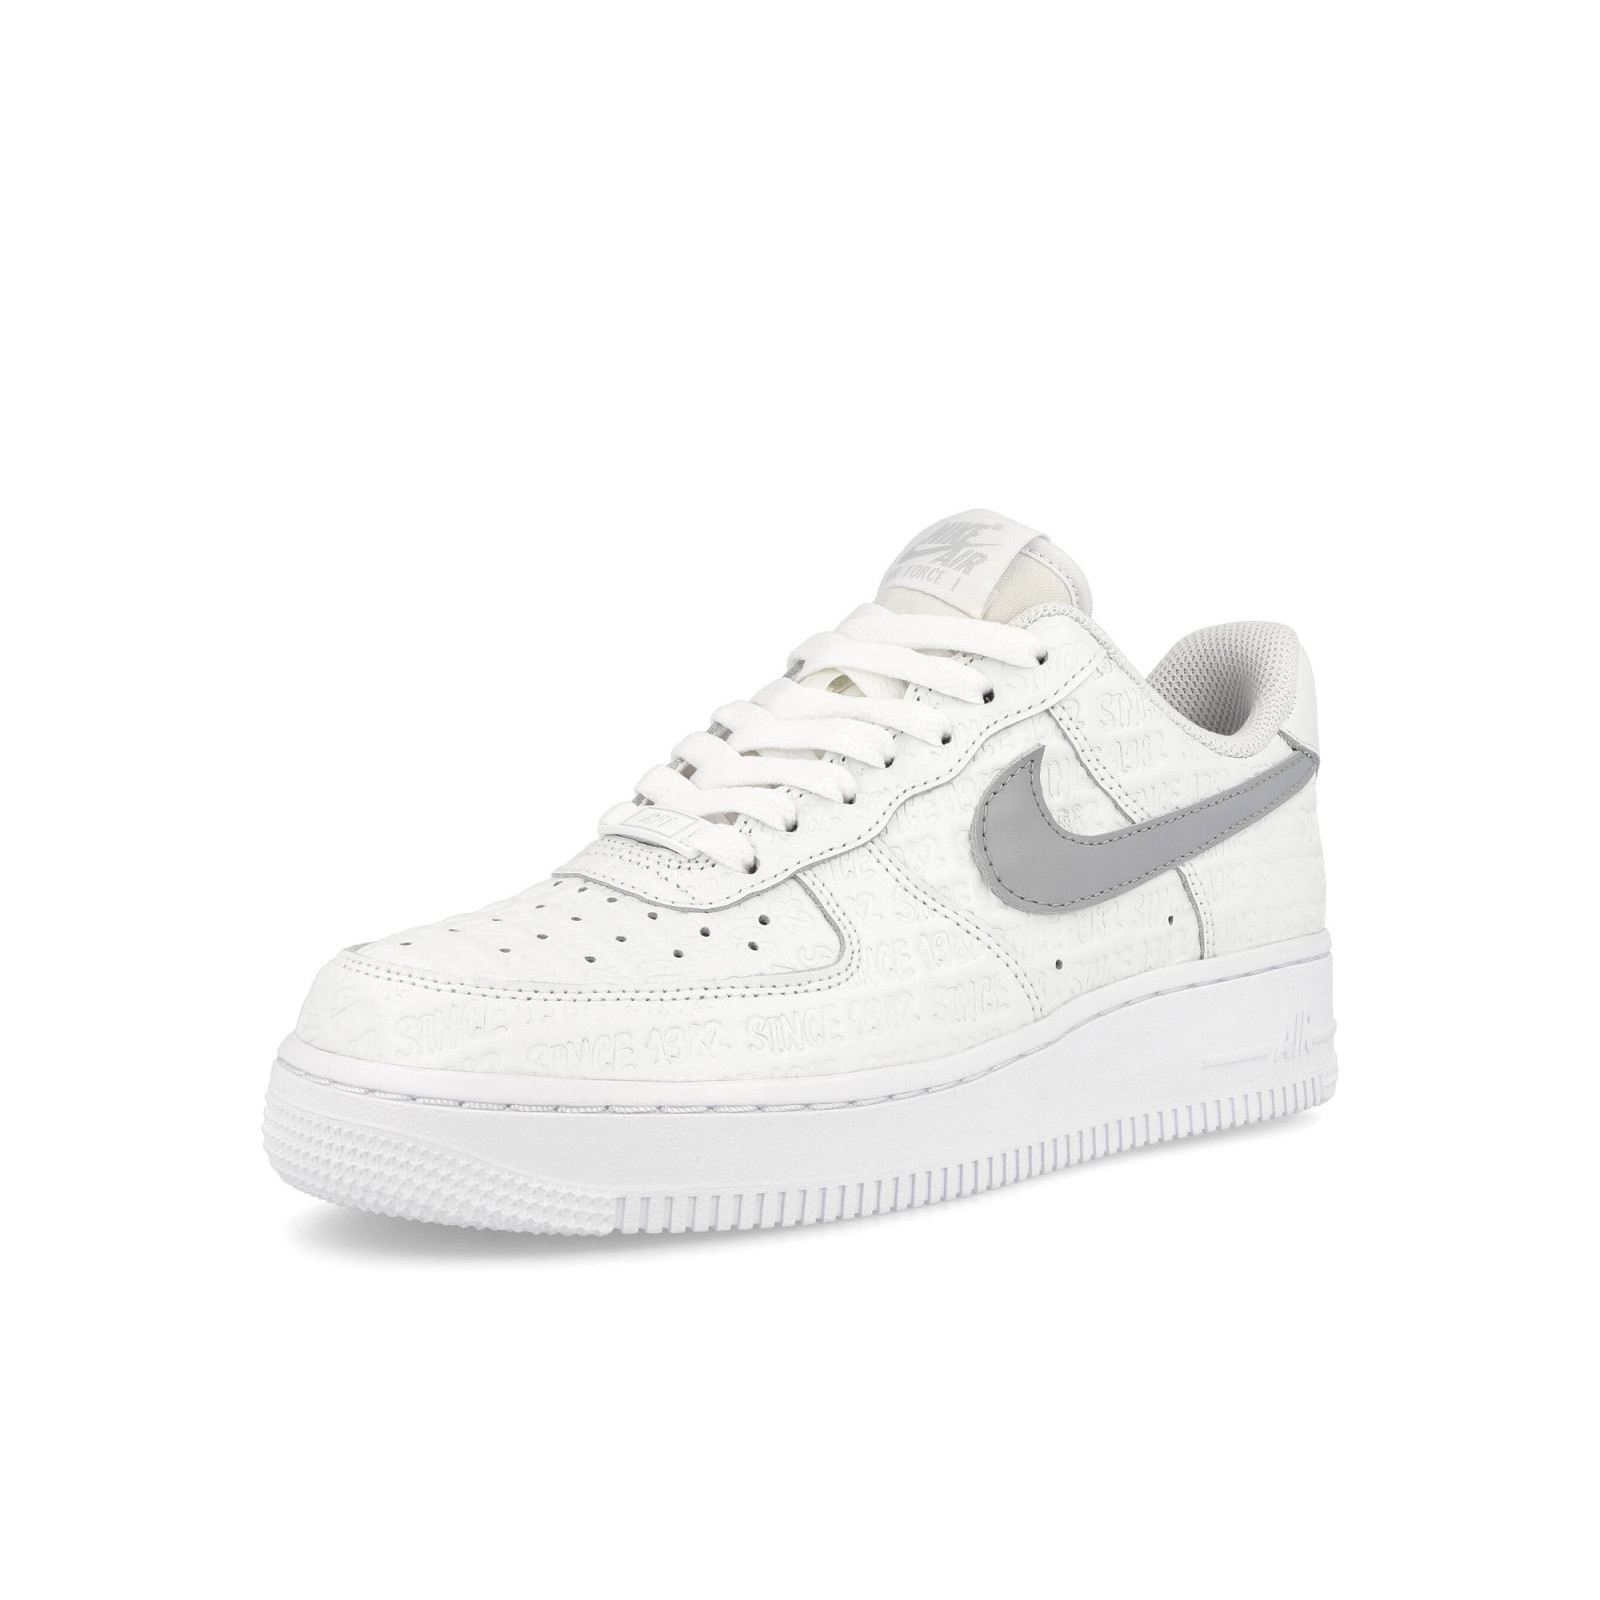 Nike Air Force 1 07 Low
White / Wolf Grey